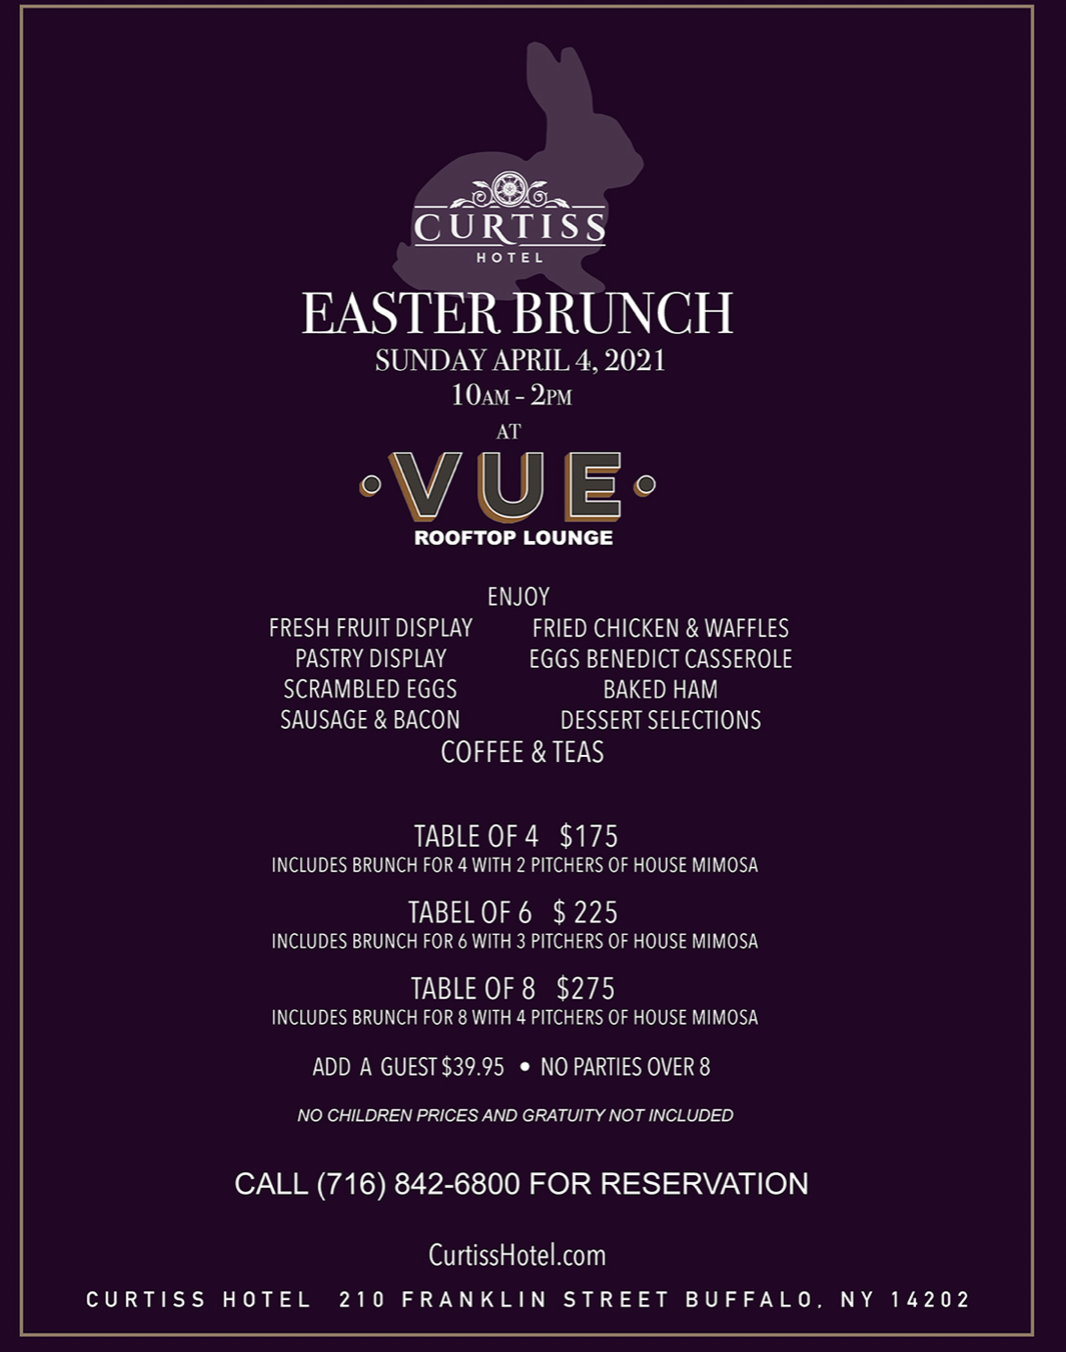 Easter Brunch at The Curtis Hotel Buffalo Place